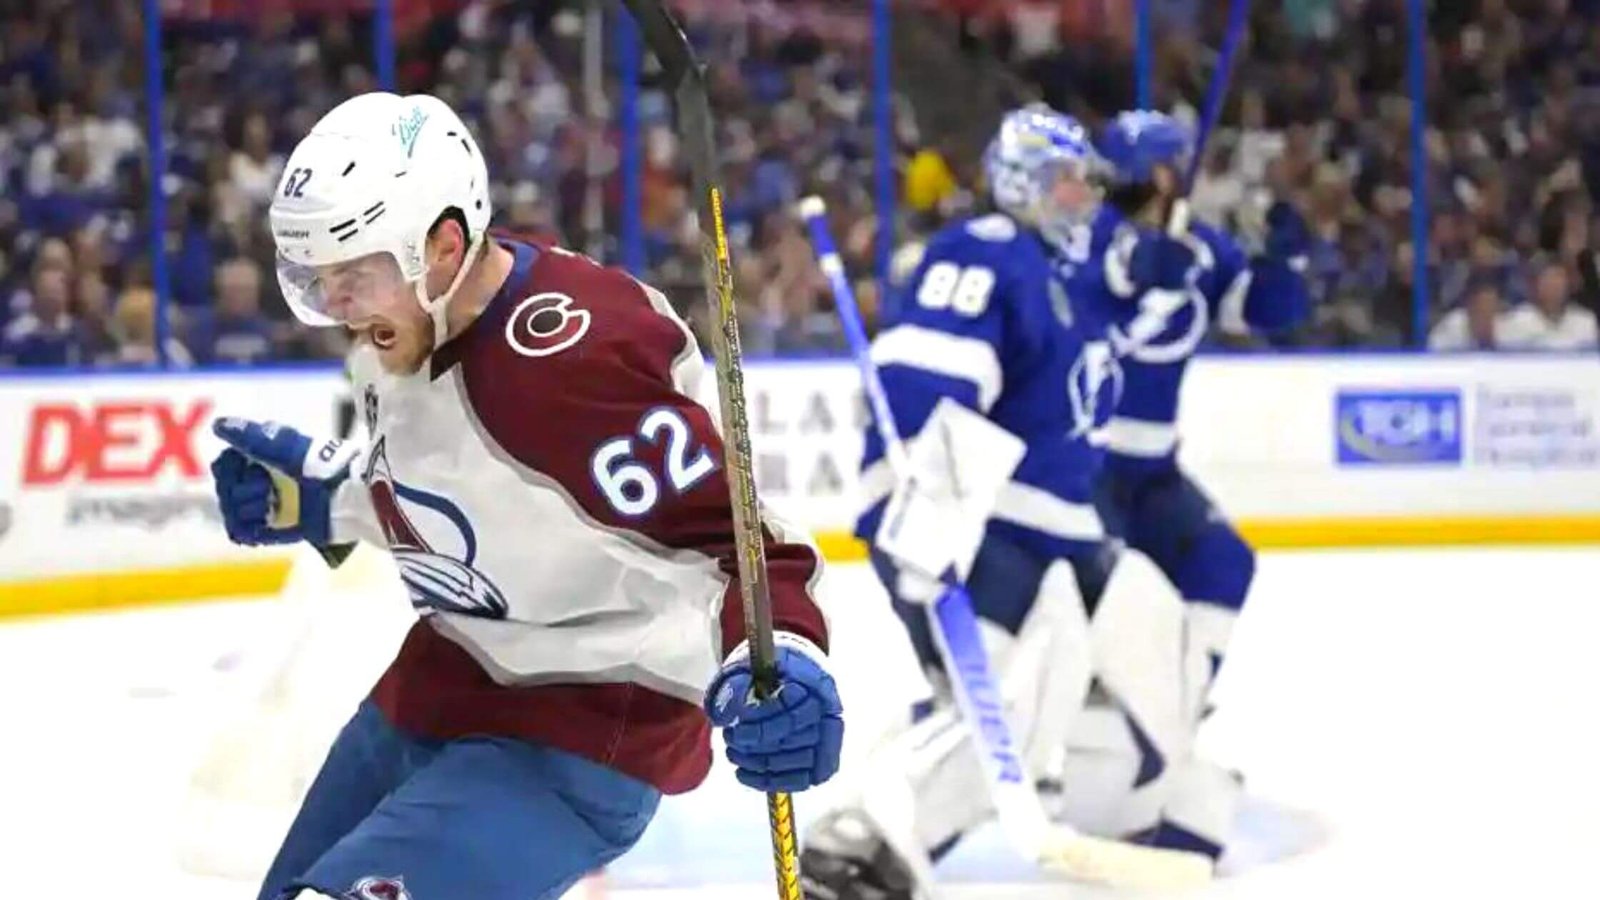 Avalanche Won Over Lightning Their First Stanley Cup Since 2001